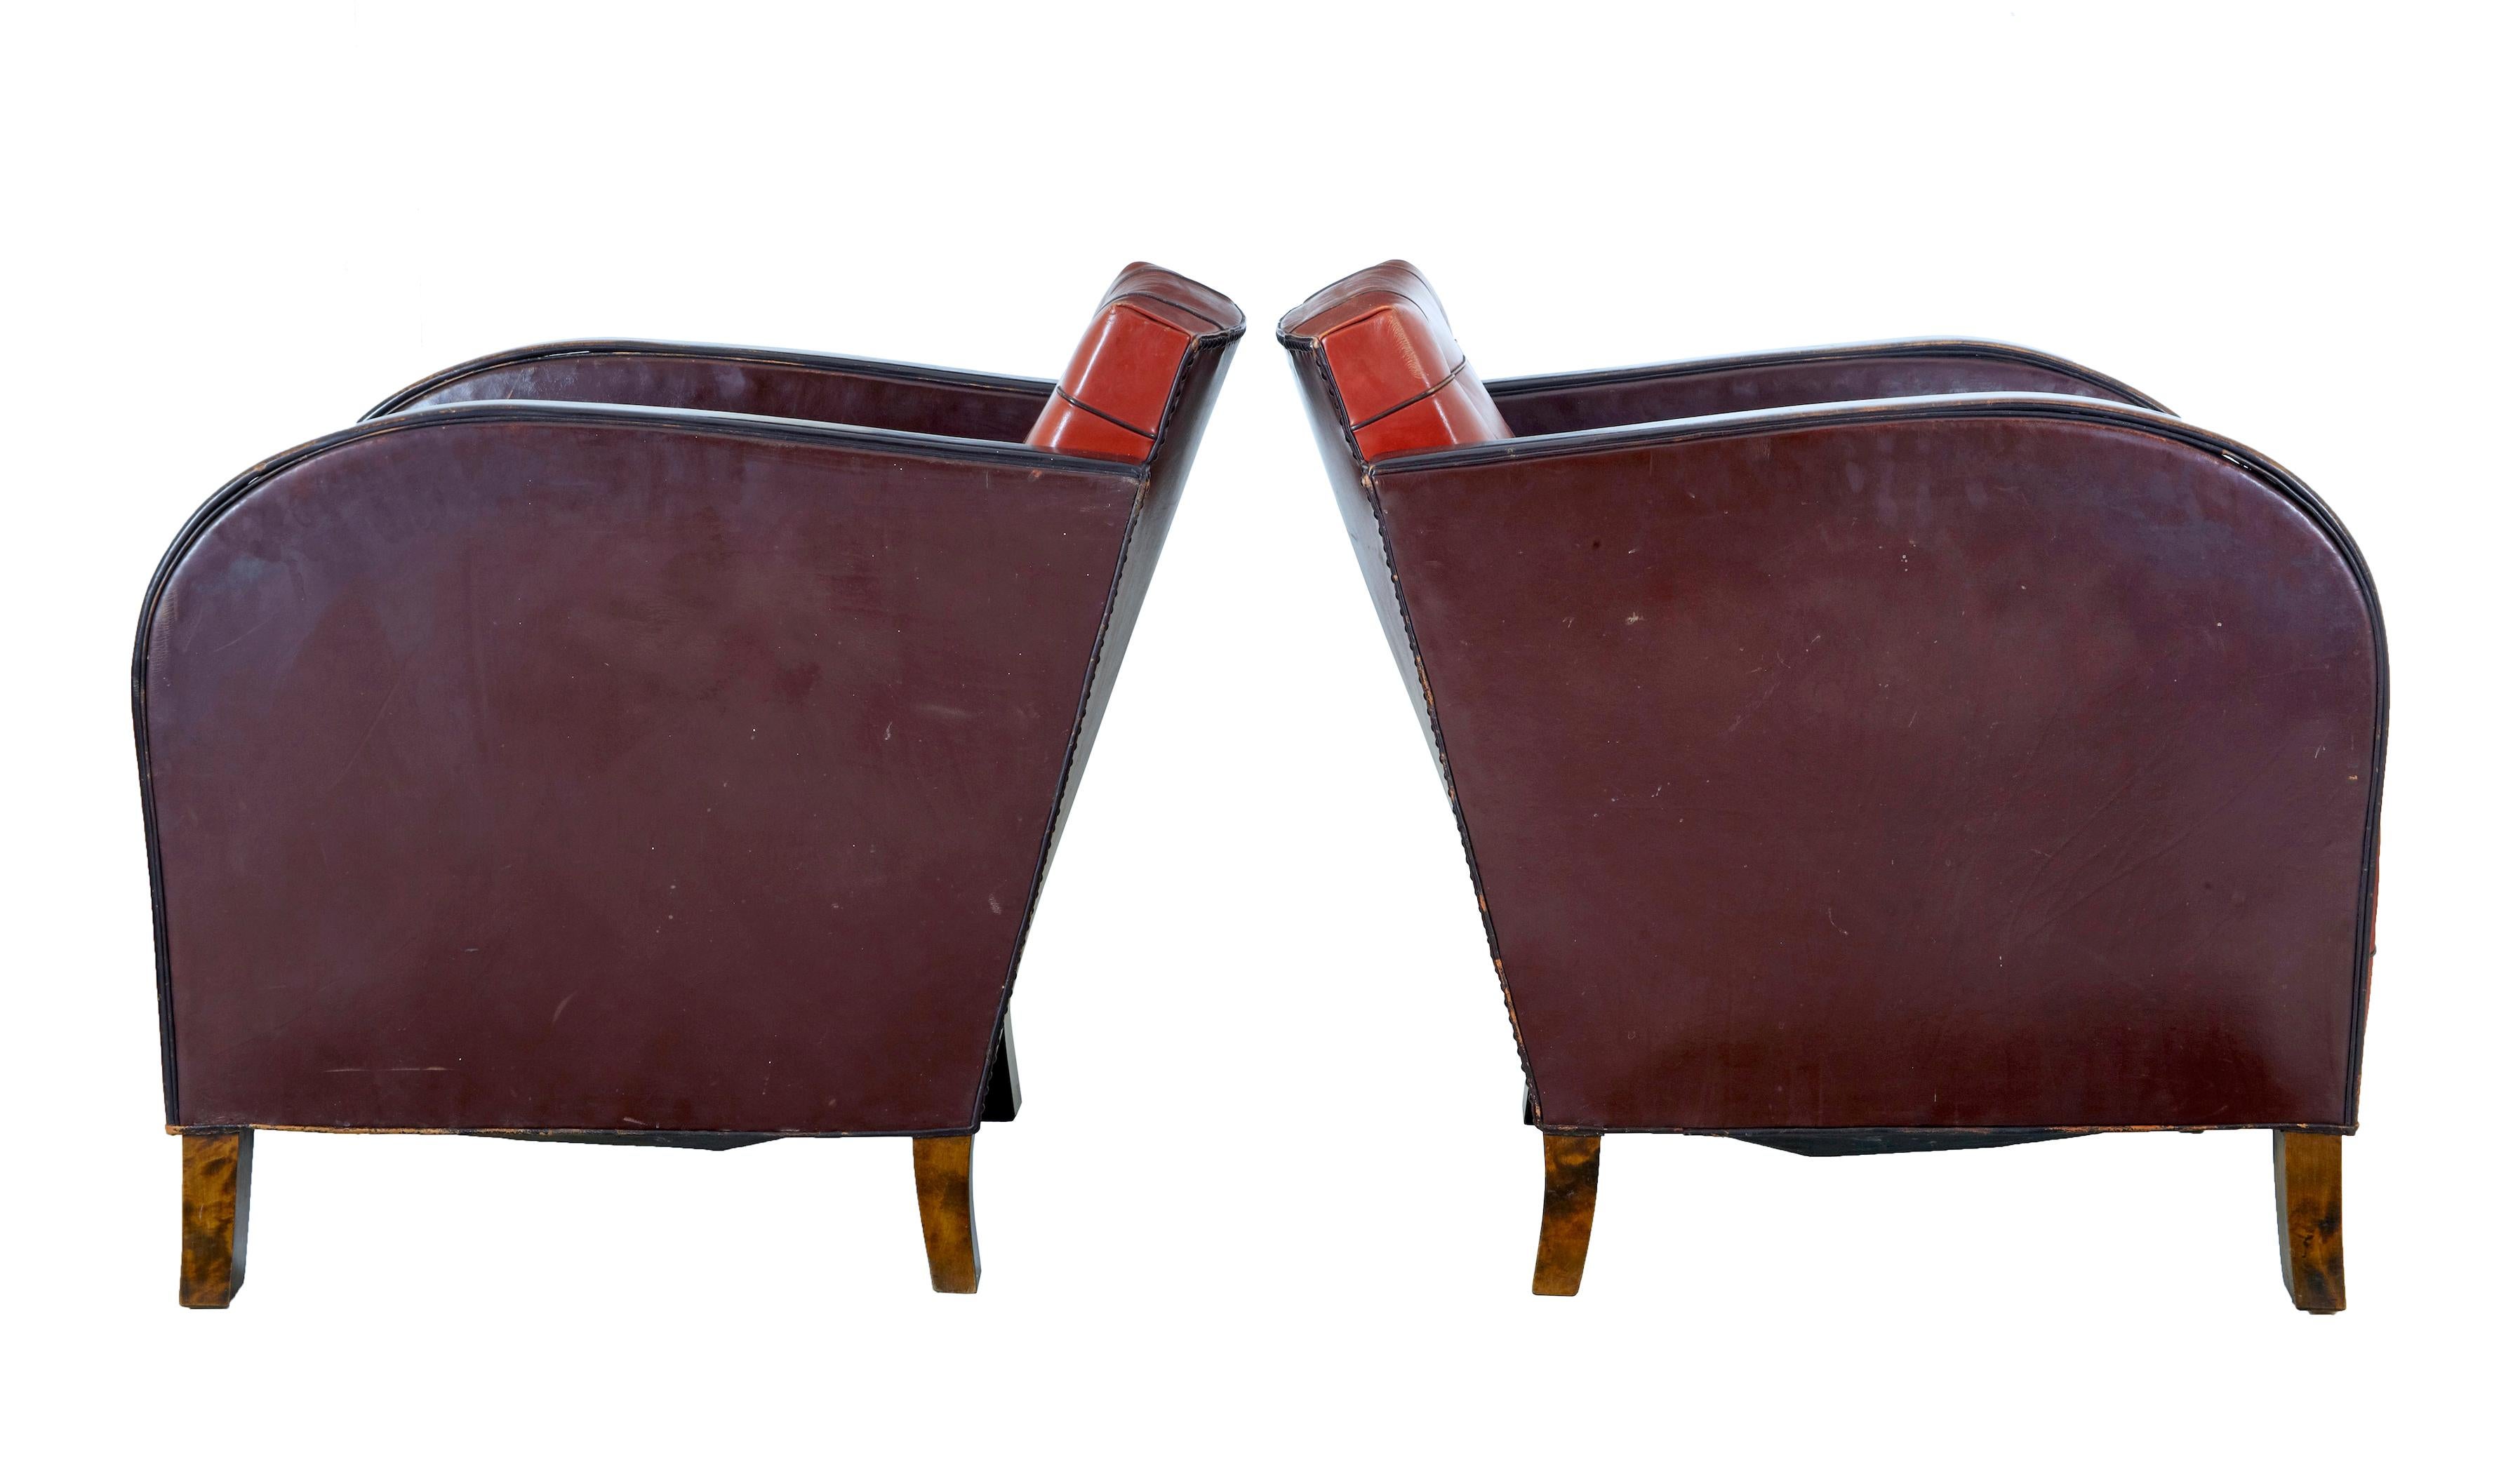 Pair of Art Deco leather club armchairs circa 1930.

Fine pair of elegant Art Deco armchairs with the typical flowing arms. Shaped backs. Upholstered in original red leather with piping and back buttons.

Standing on birch block feet.

Leather